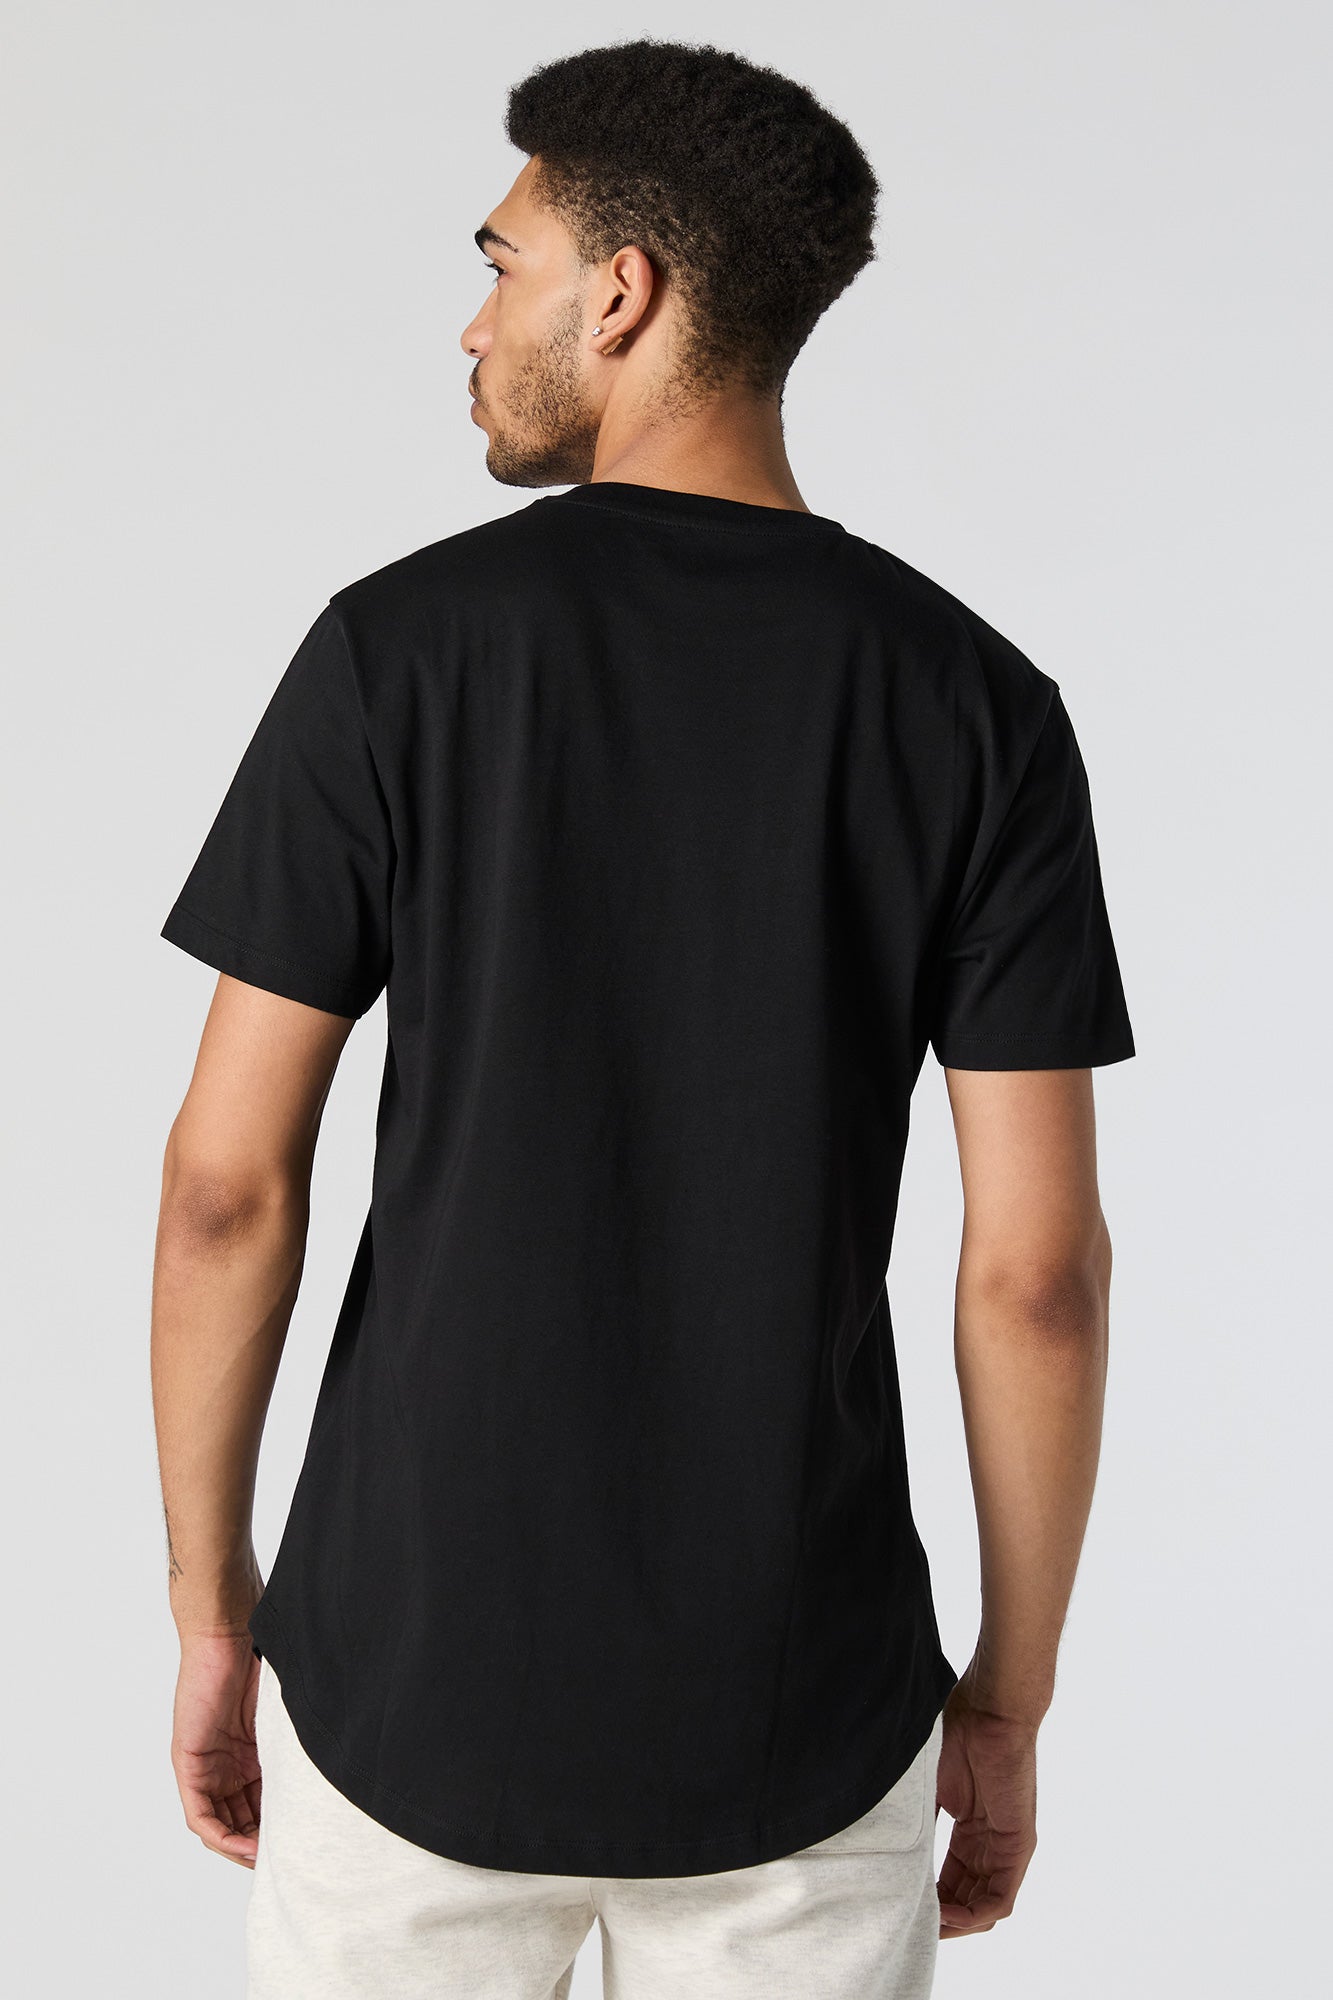 Brooklyn Embroidered T-Shirt